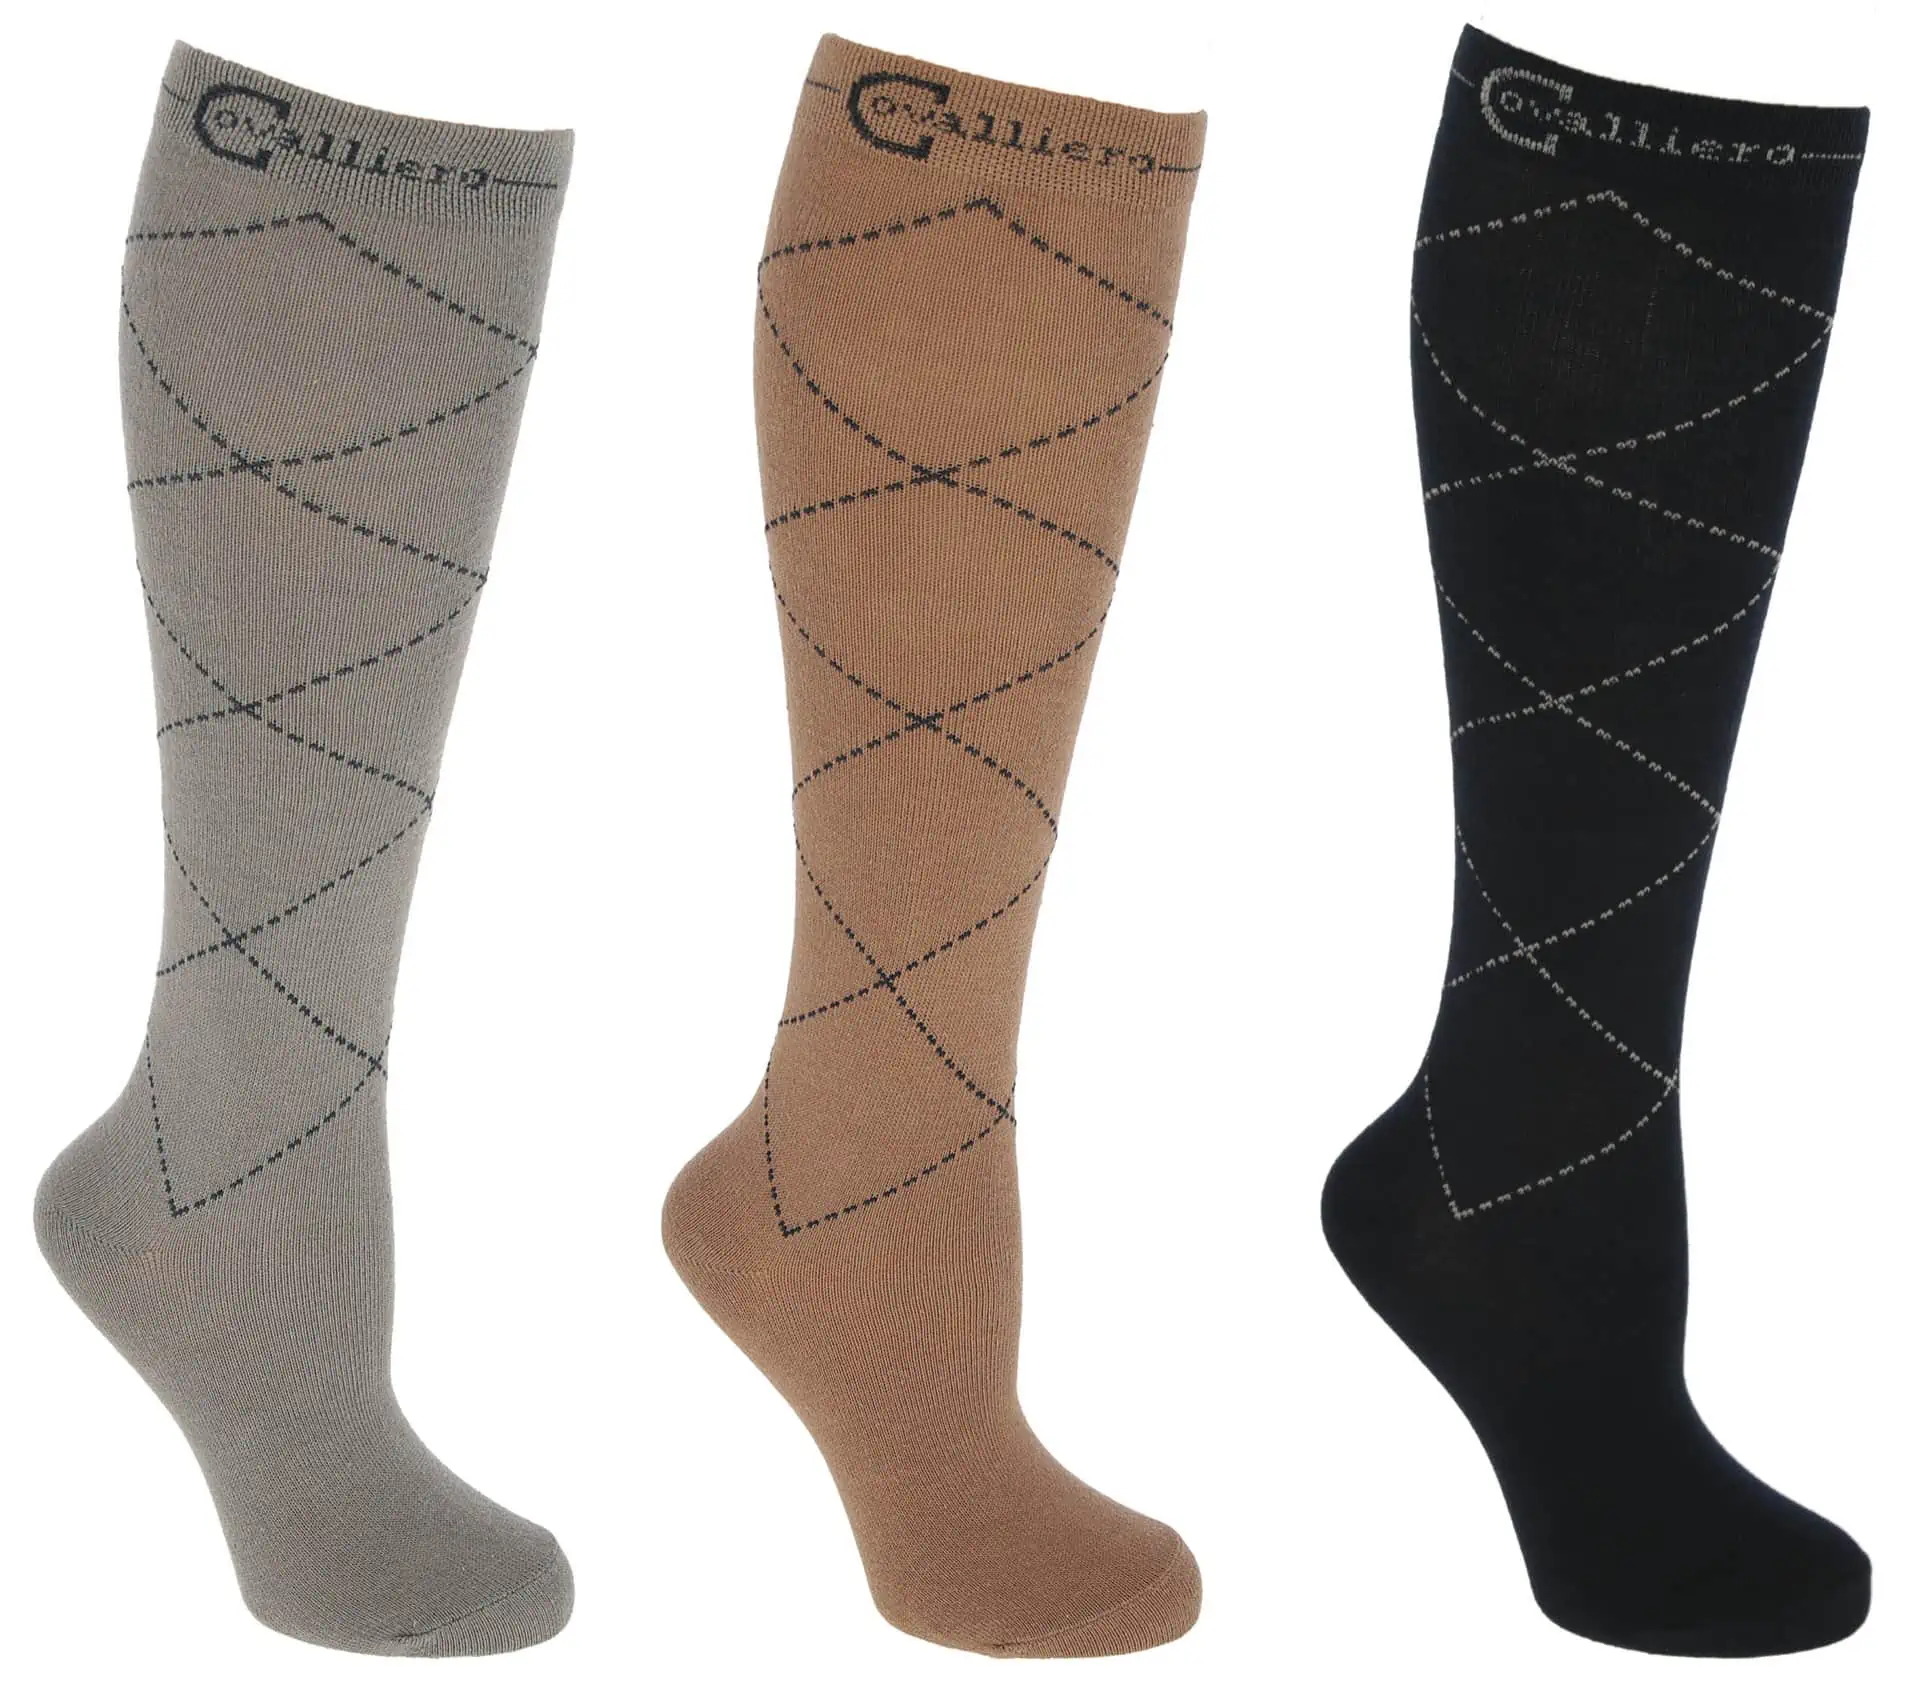 Riding Socks Check Pack of 3